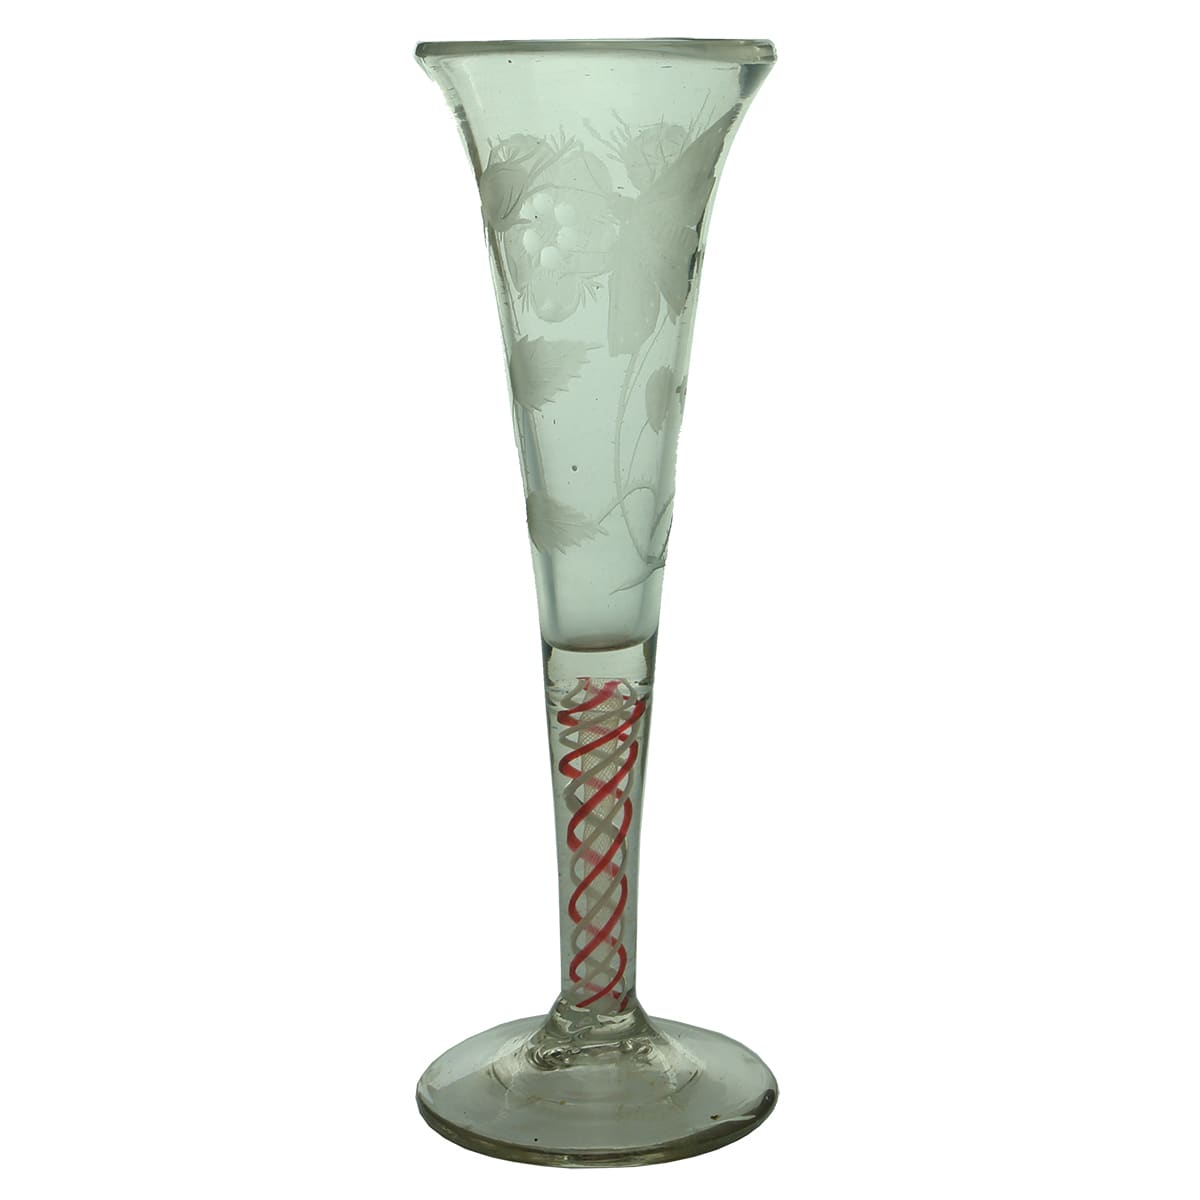 Glass. Georgian twisted red and white stem. Engraved butterfly and flowers.